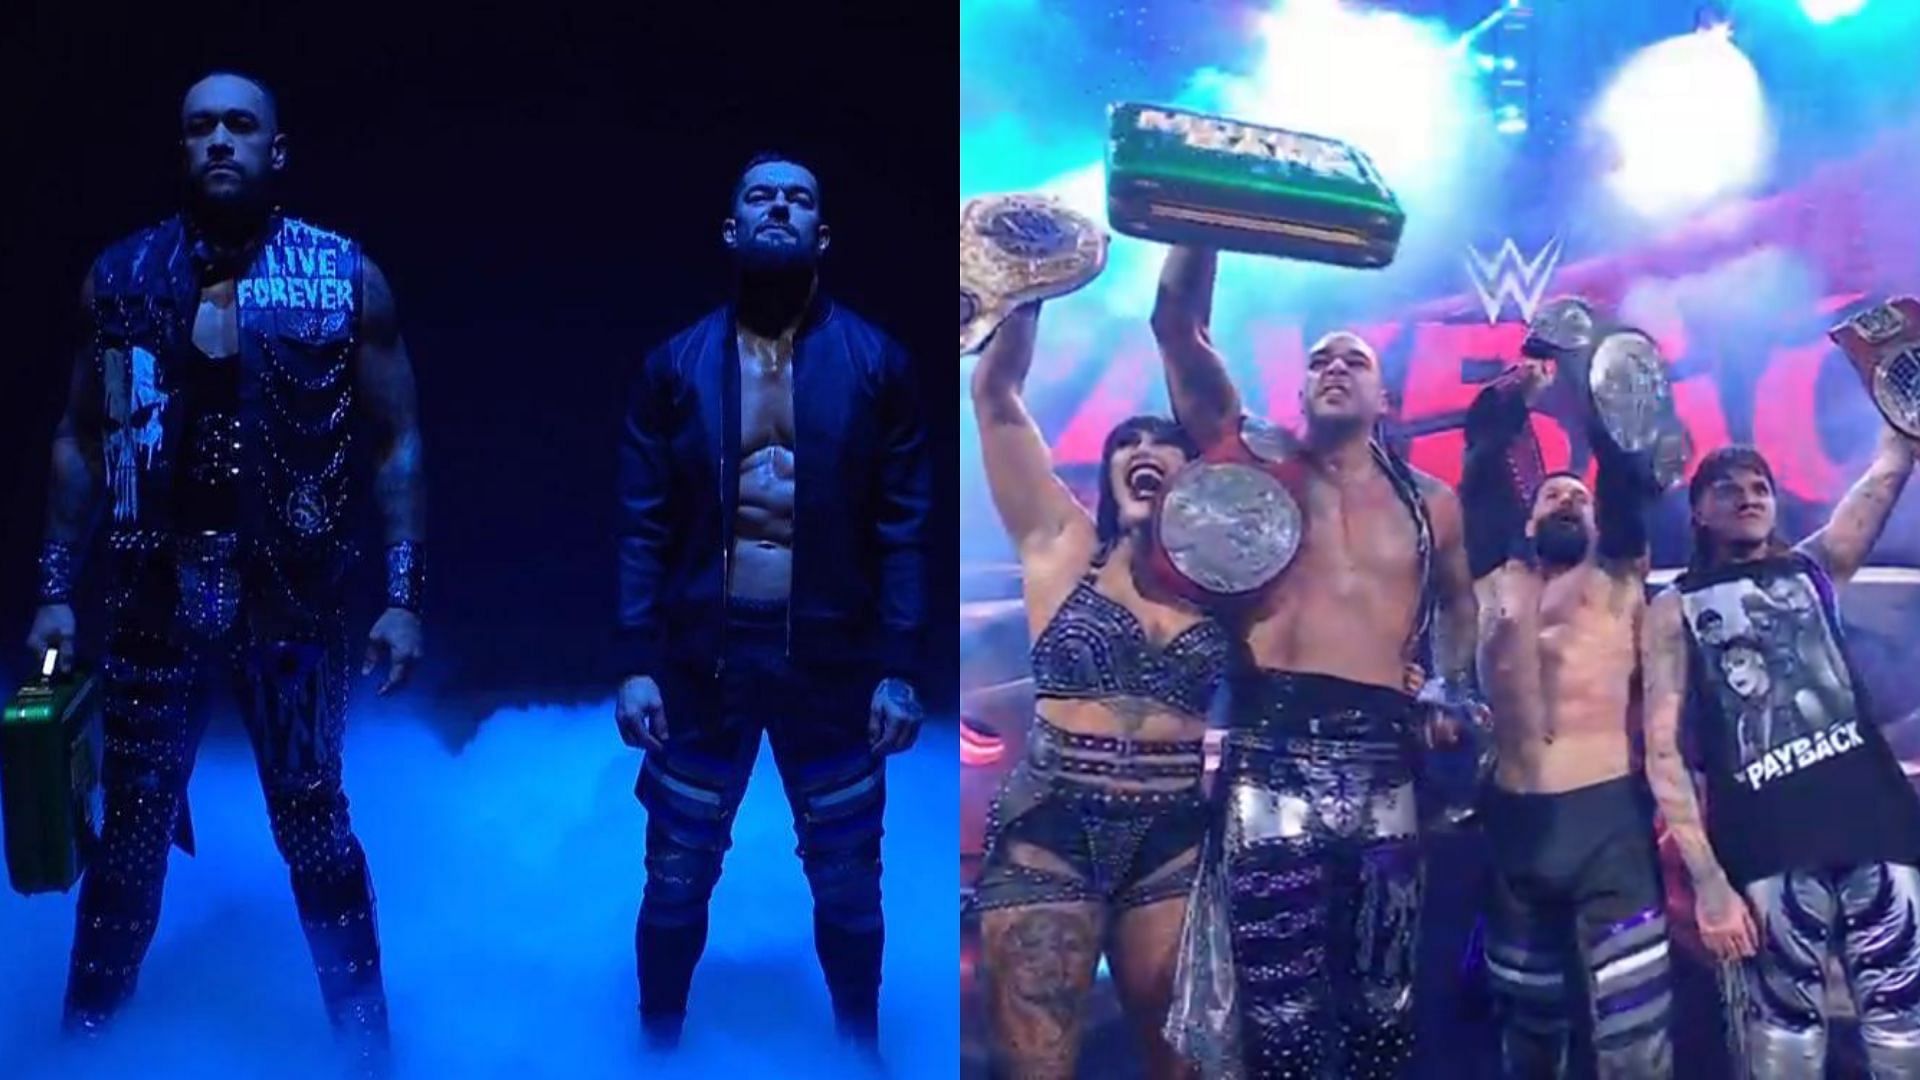 Finn Balor and Damian Priest are the new tag team champions